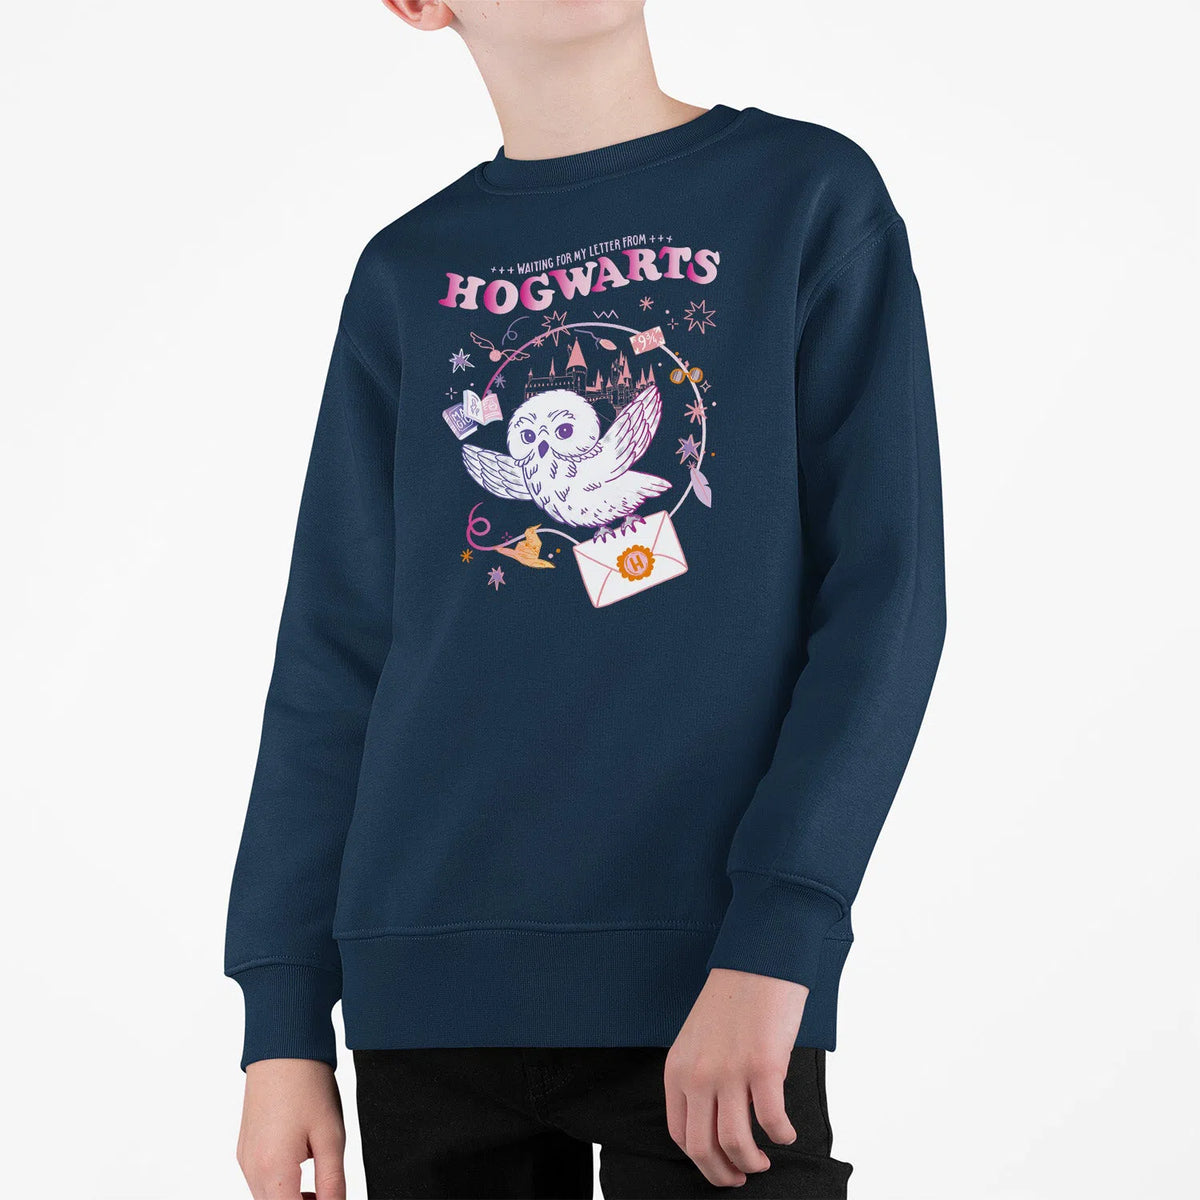 Waiting For My Letter From Hogwarts Hedwig | Kid's Sweatshirt Chroma Clothing